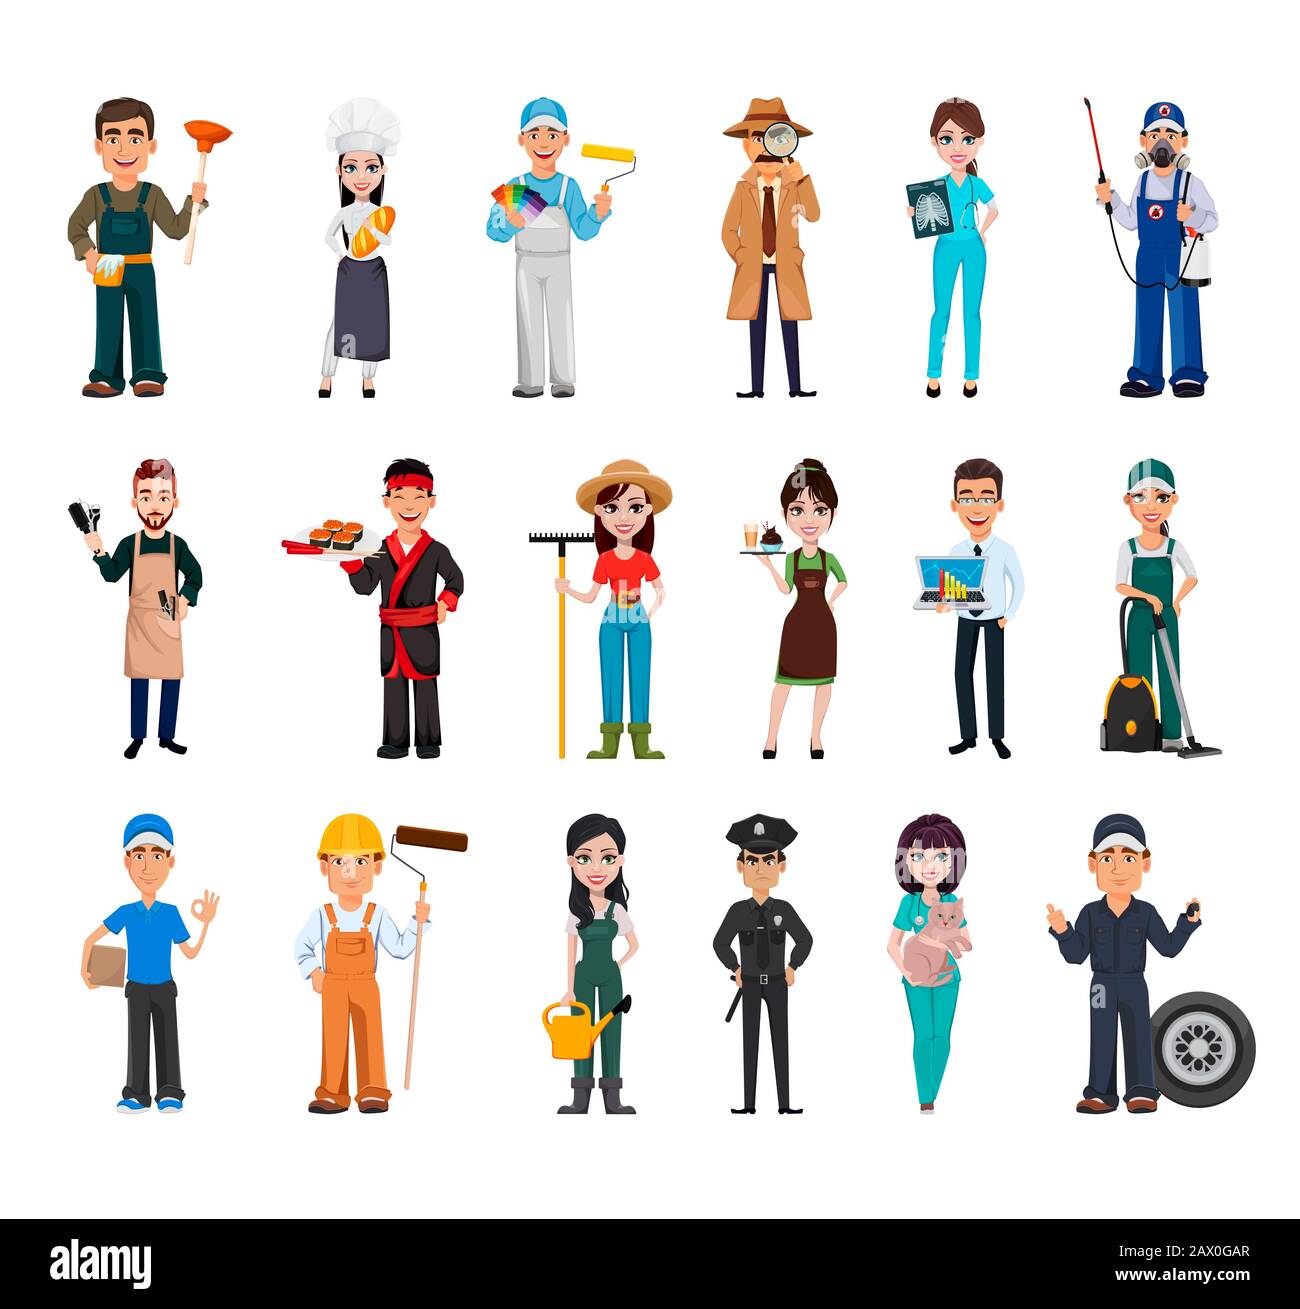 Set of 18 professions. People of different occupations, eighteen cartoon characters. Stock vector illustration Stock Vector